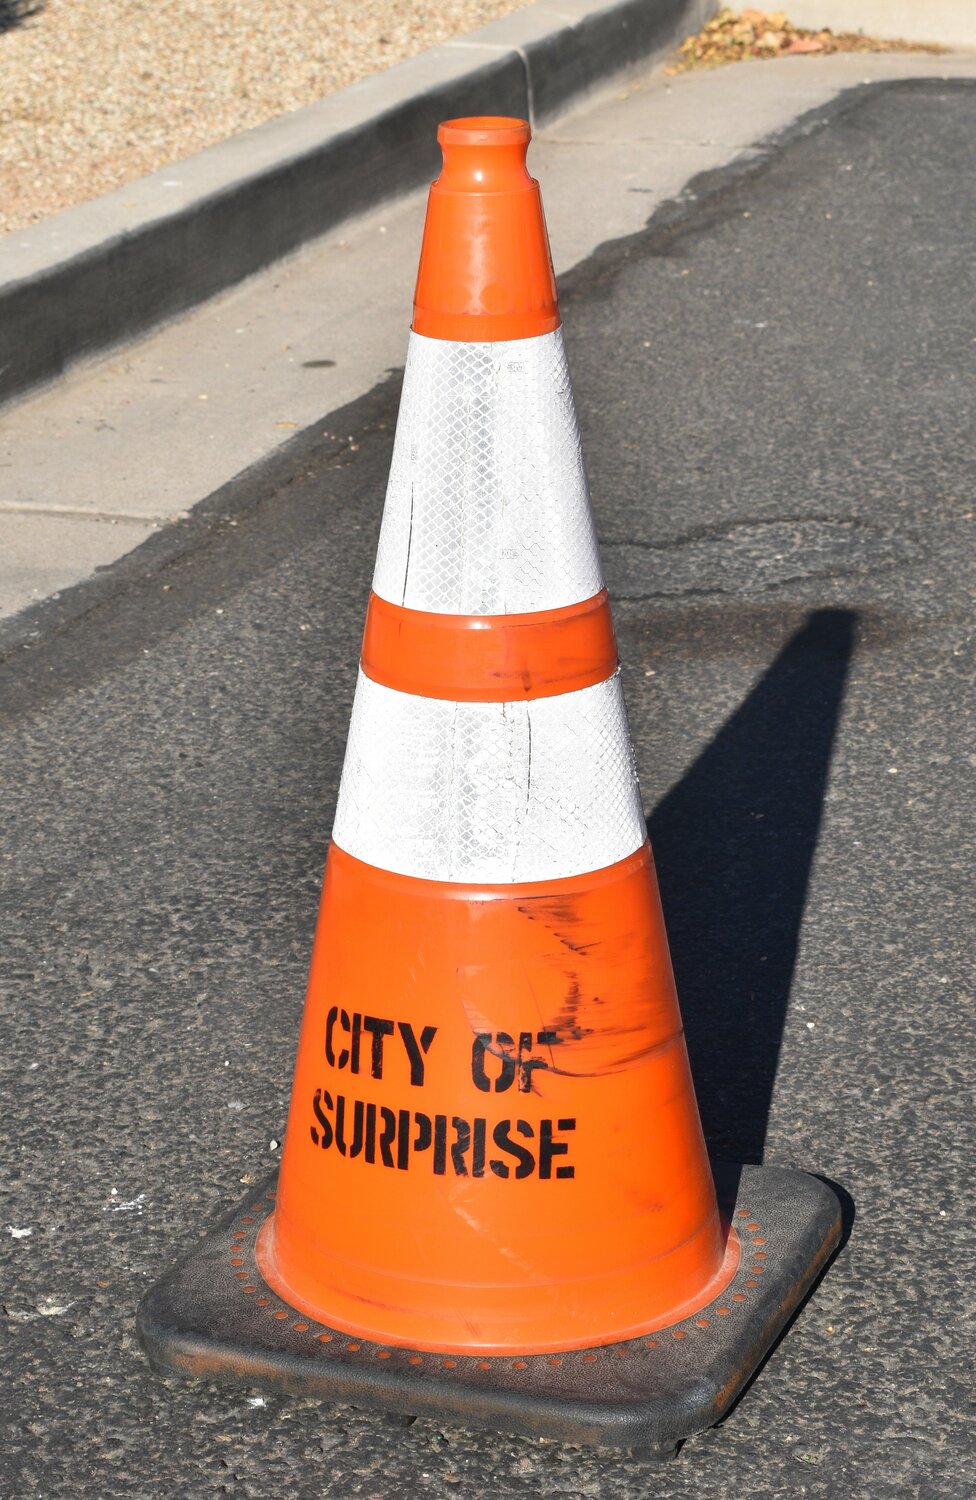 A city of Surprise traffic cone.